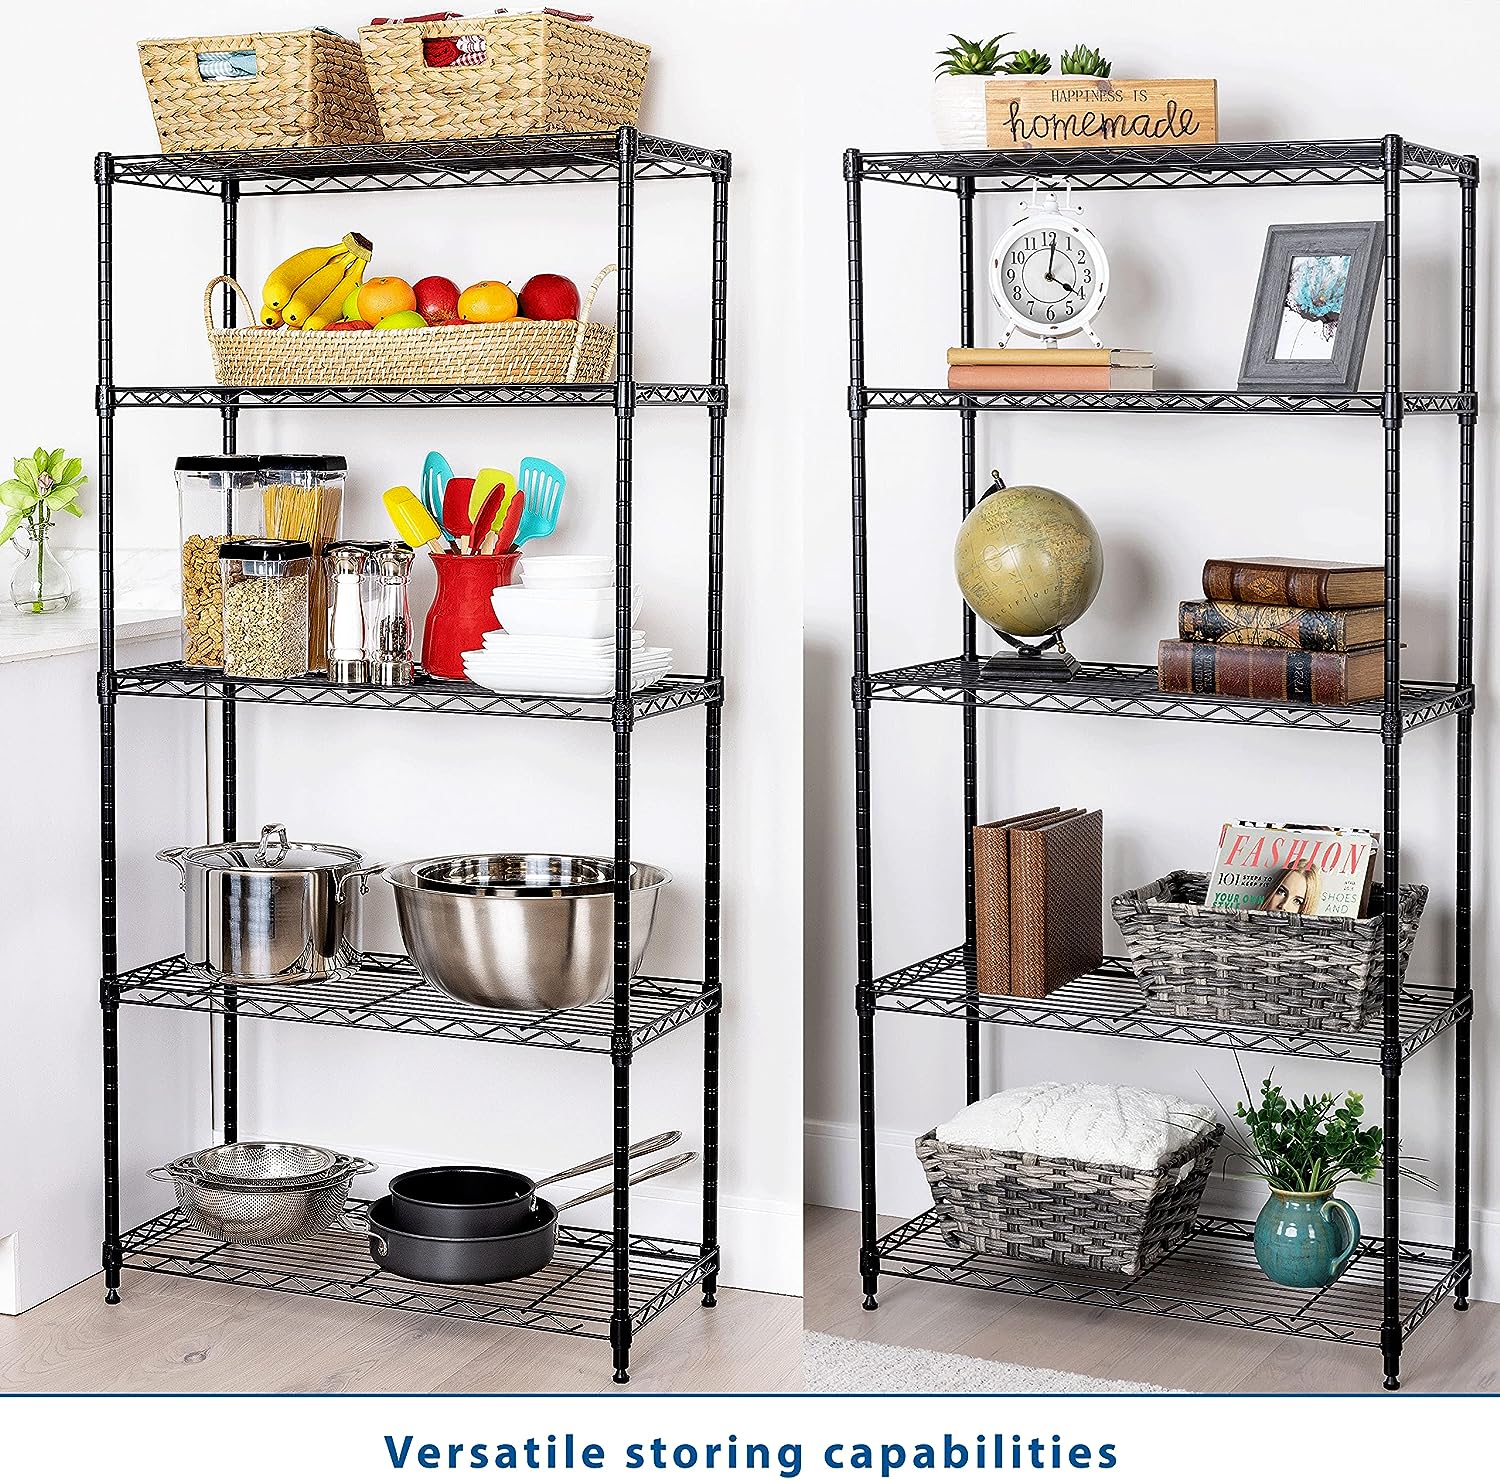 Seville Classics Solid Steel Wire Shelving Storage Unit Adjustable